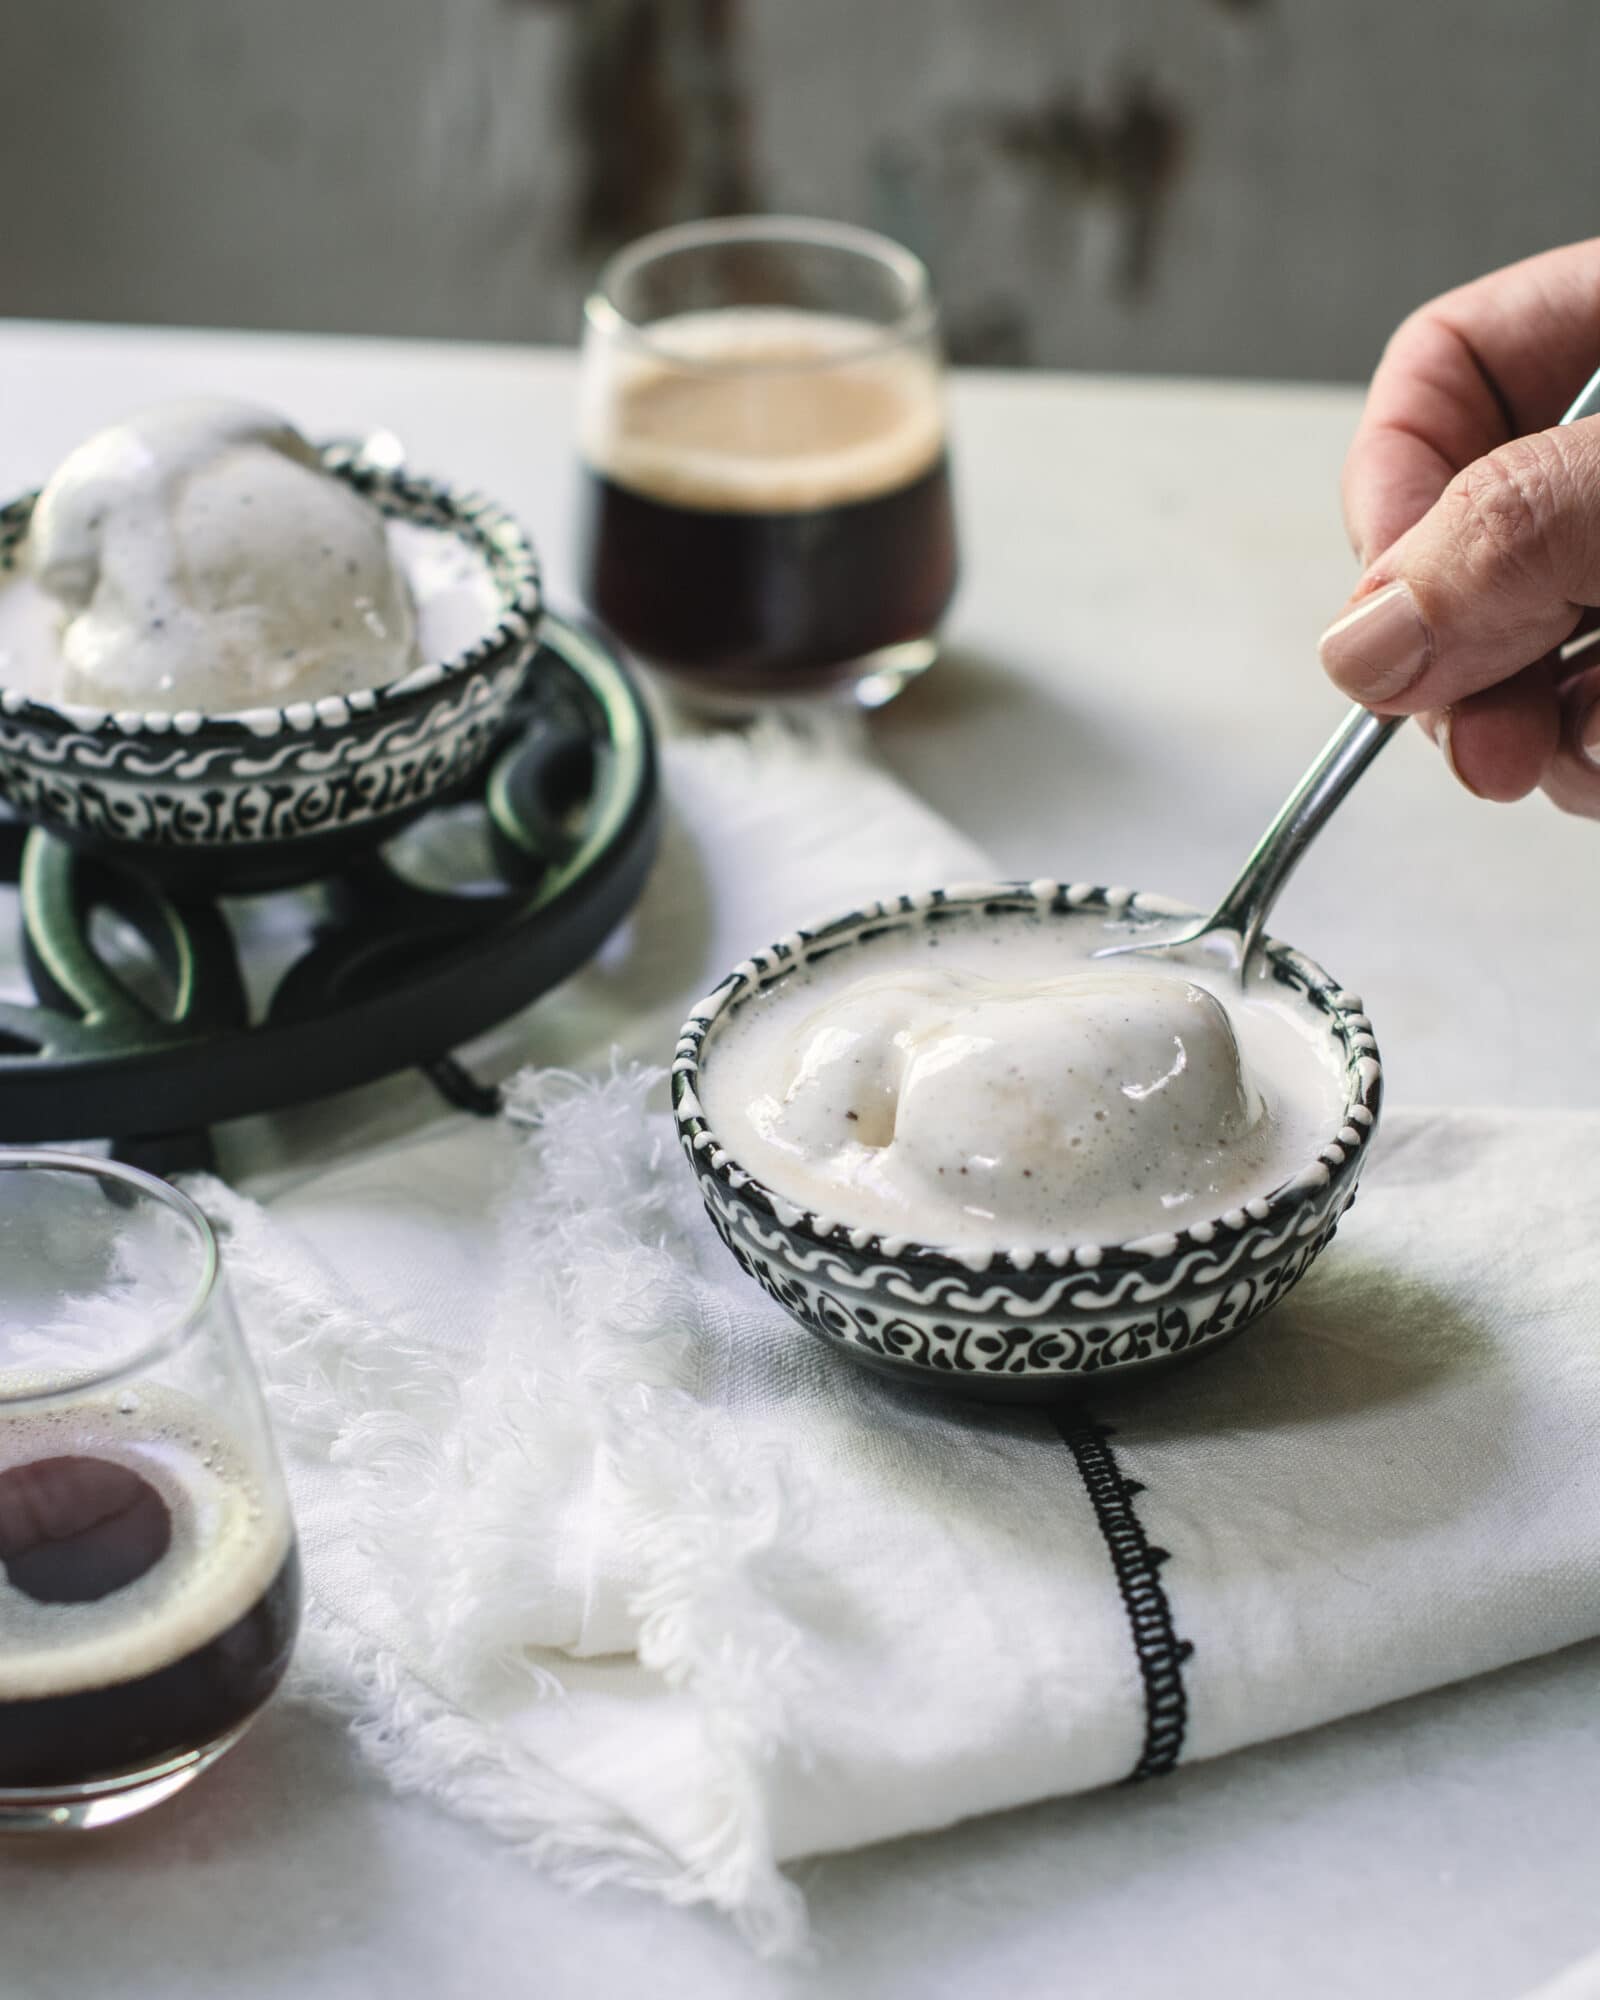 Serving affogato in bowls on white table with hand holding spoon